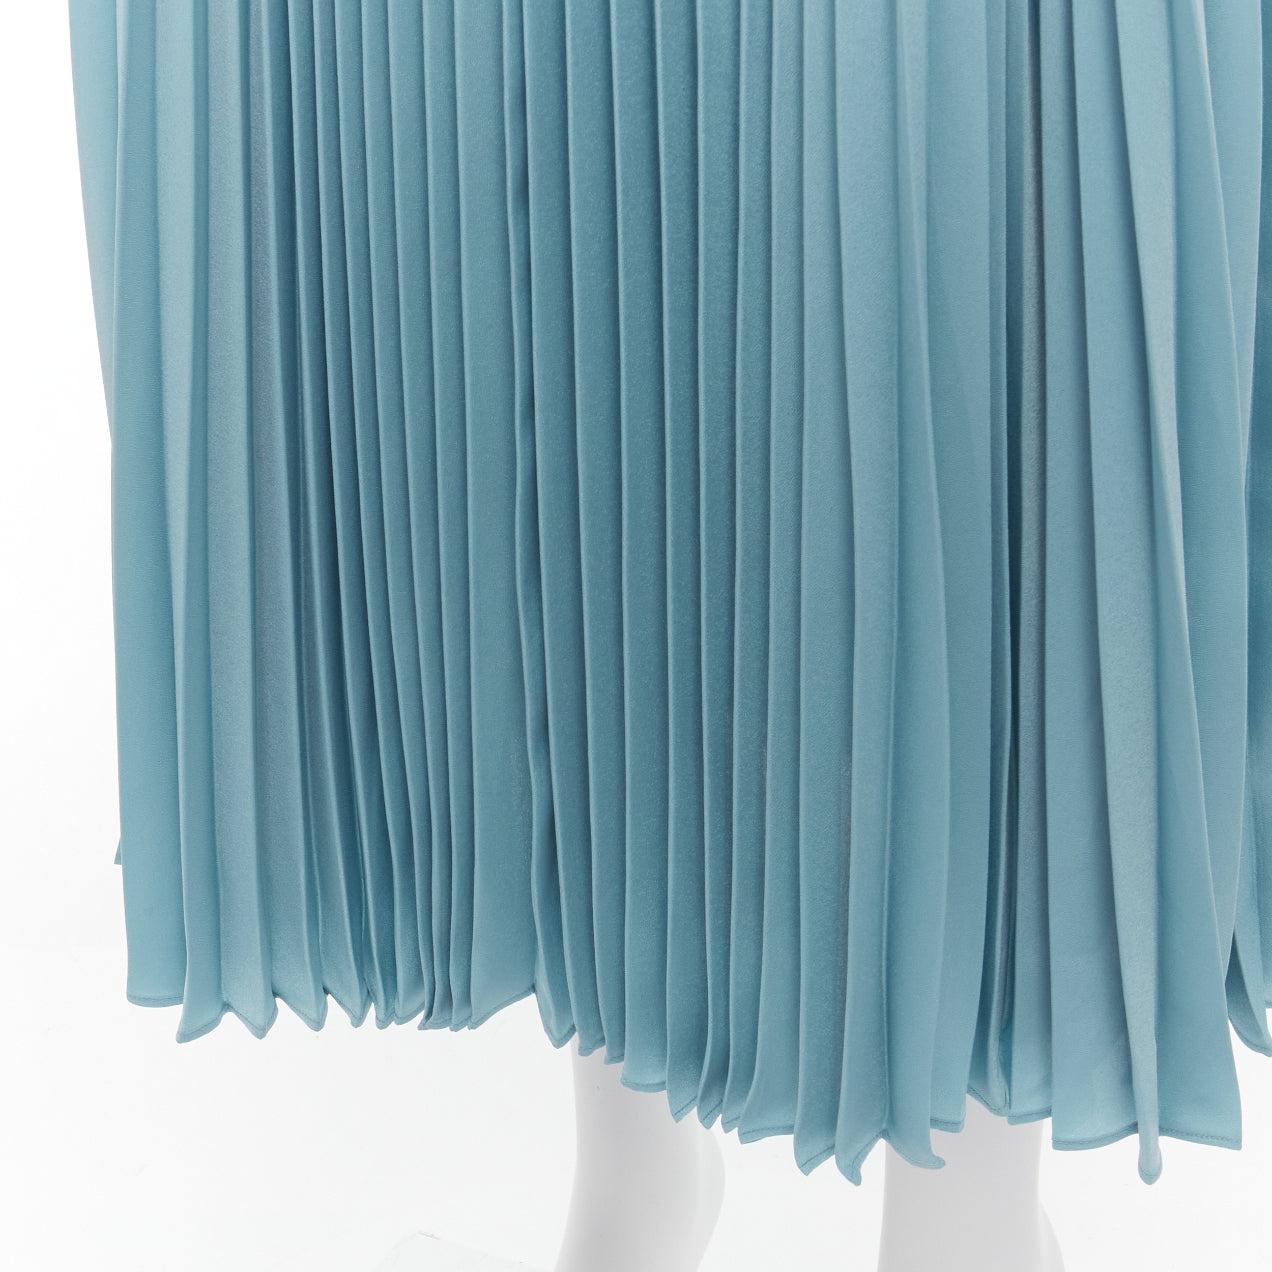 new JOSEPH Abbot blue accordion pleats center seam round table skirt FR34 XS
Reference: SNKO/A00311
Brand: Joseph
Model: Abbot
Material: Polyester
Color: Blue
Pattern: Solid
Closure: Zip
Extra Details: Side zip detail. Center front and back